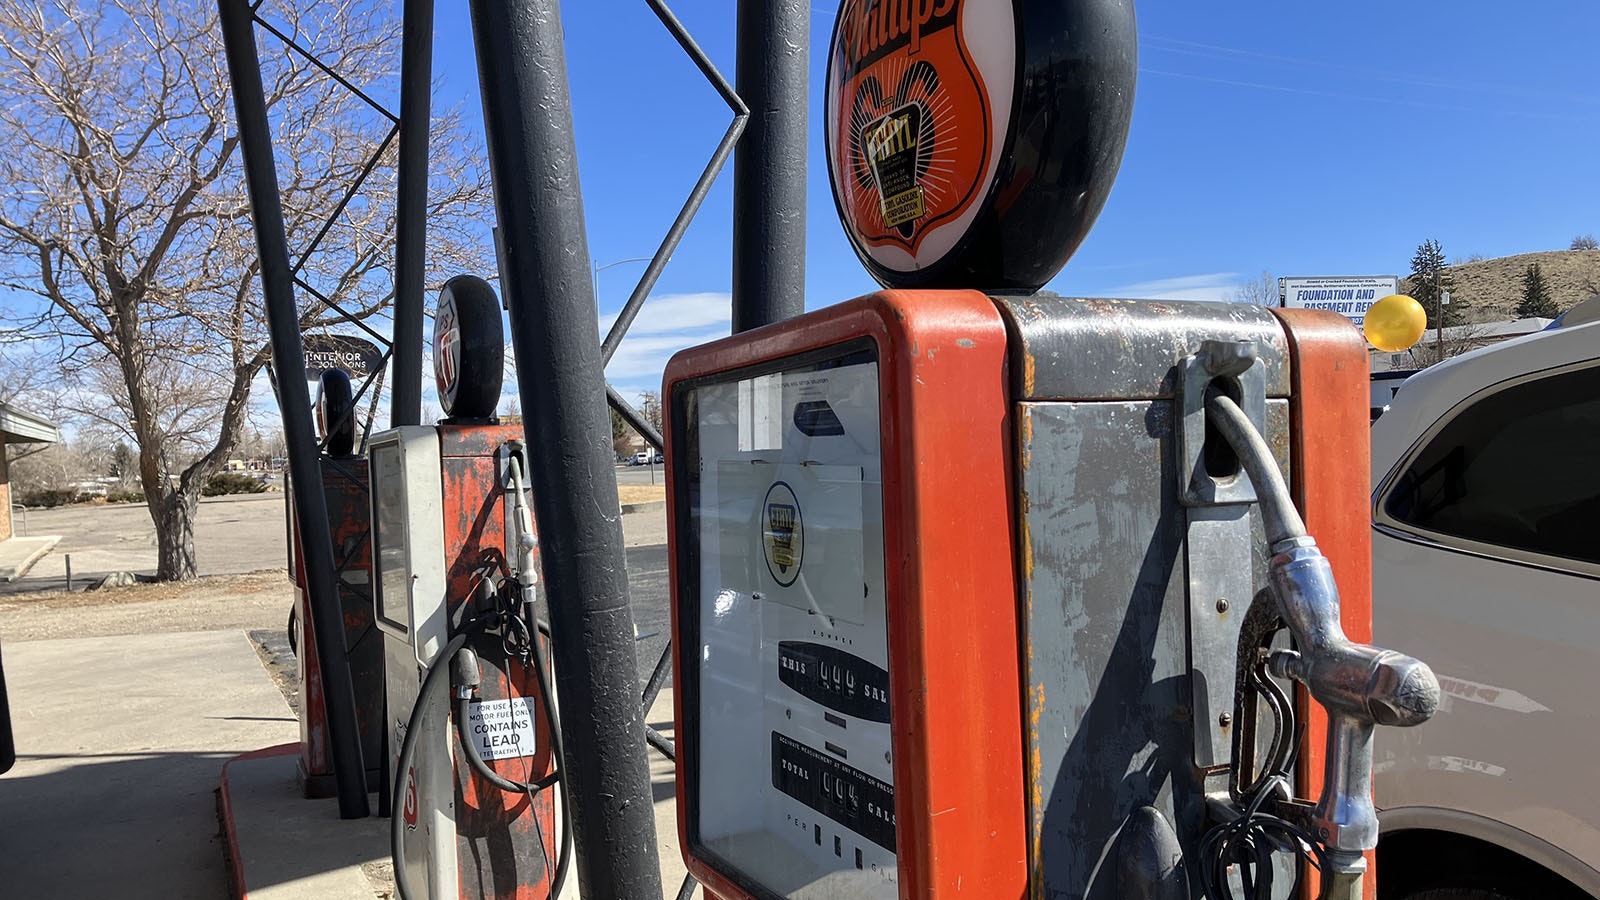 Gas pumps with colors that represented Phillips 66 from 1930-1959 are at the restored gas station.